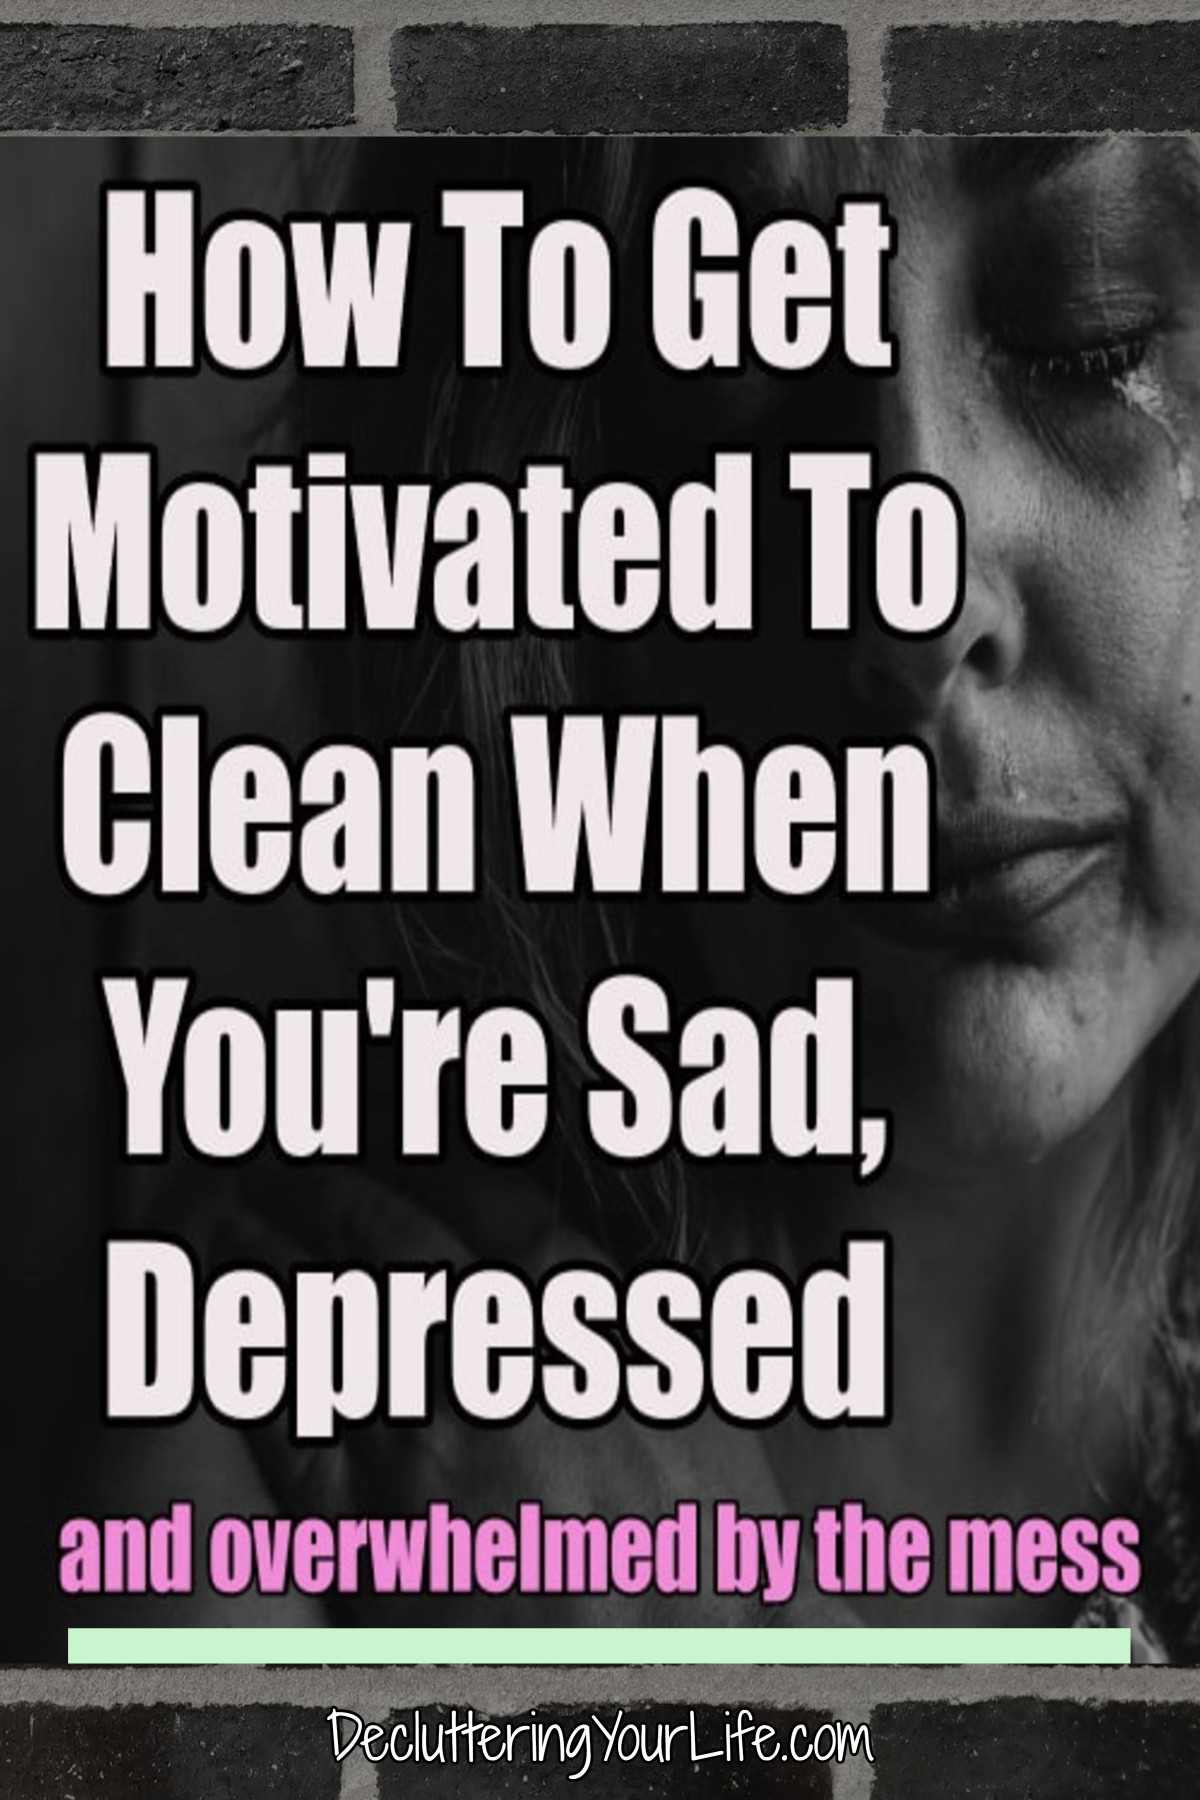 how to get motivated to clean when depressed